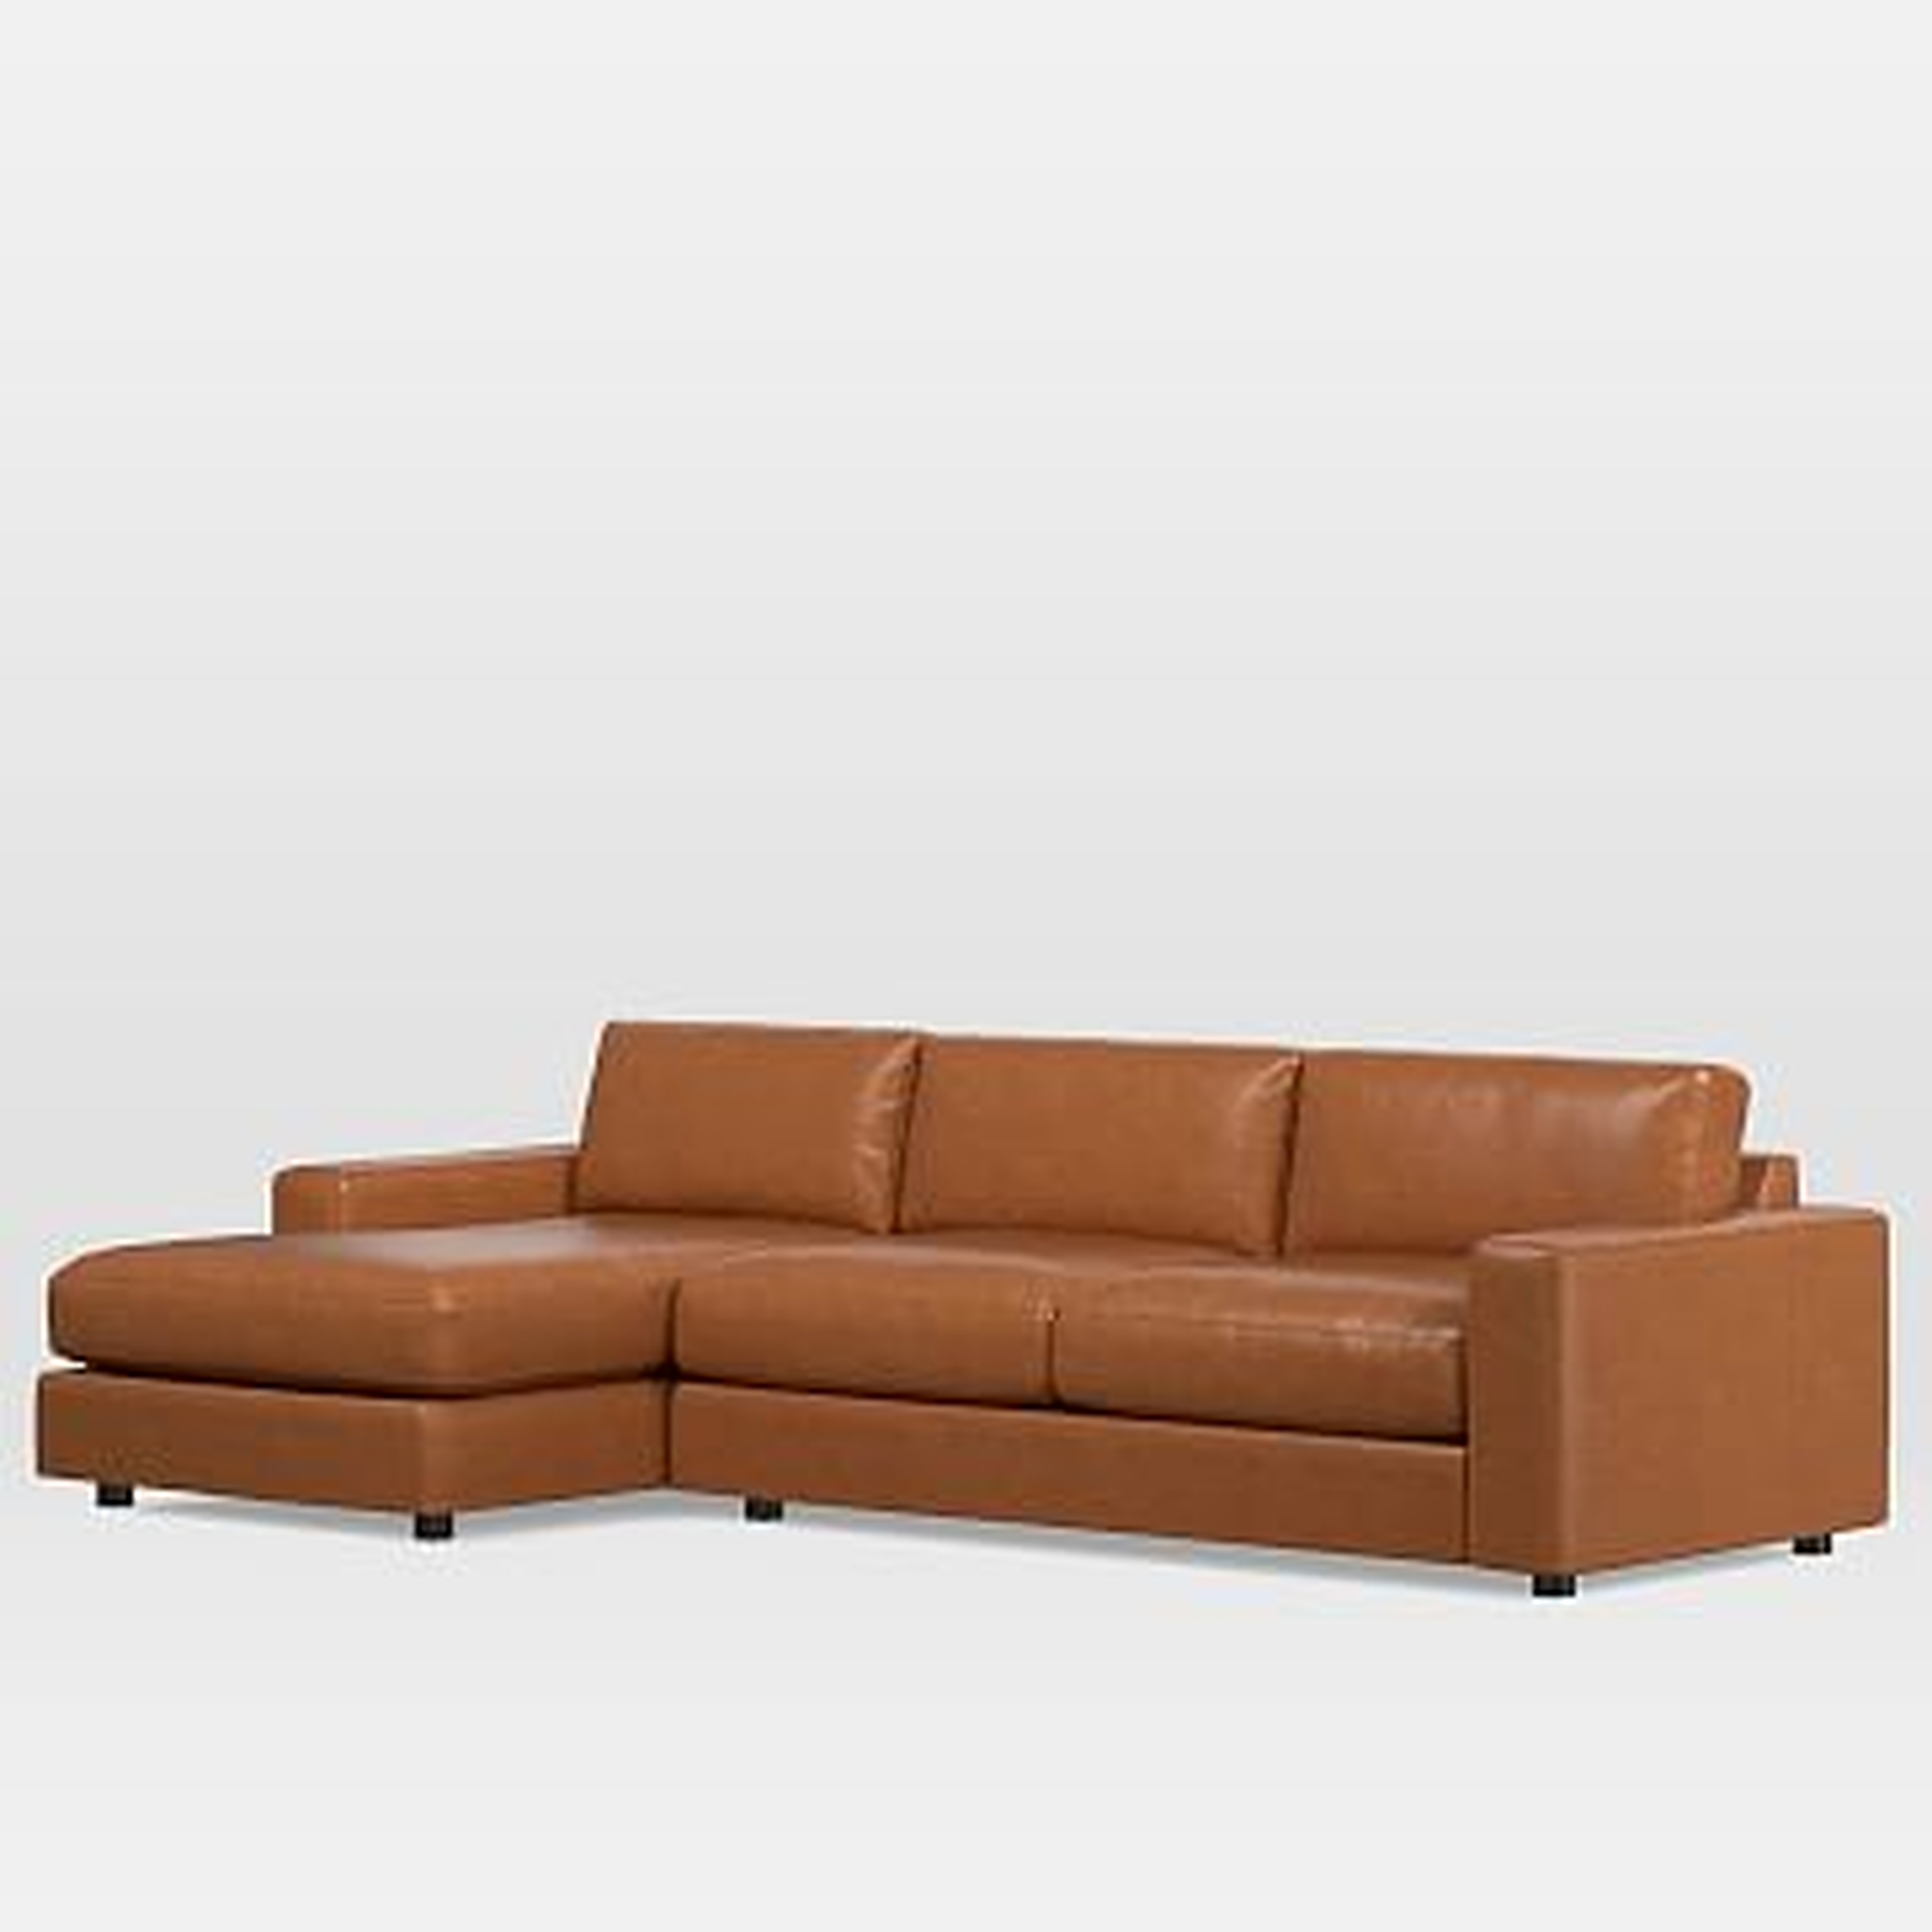 Urban Sectional Set 02: Right Arm 2 Seater Sofa, Left Arm Chaise, Poly, Vegan Leather, Saddle - West Elm